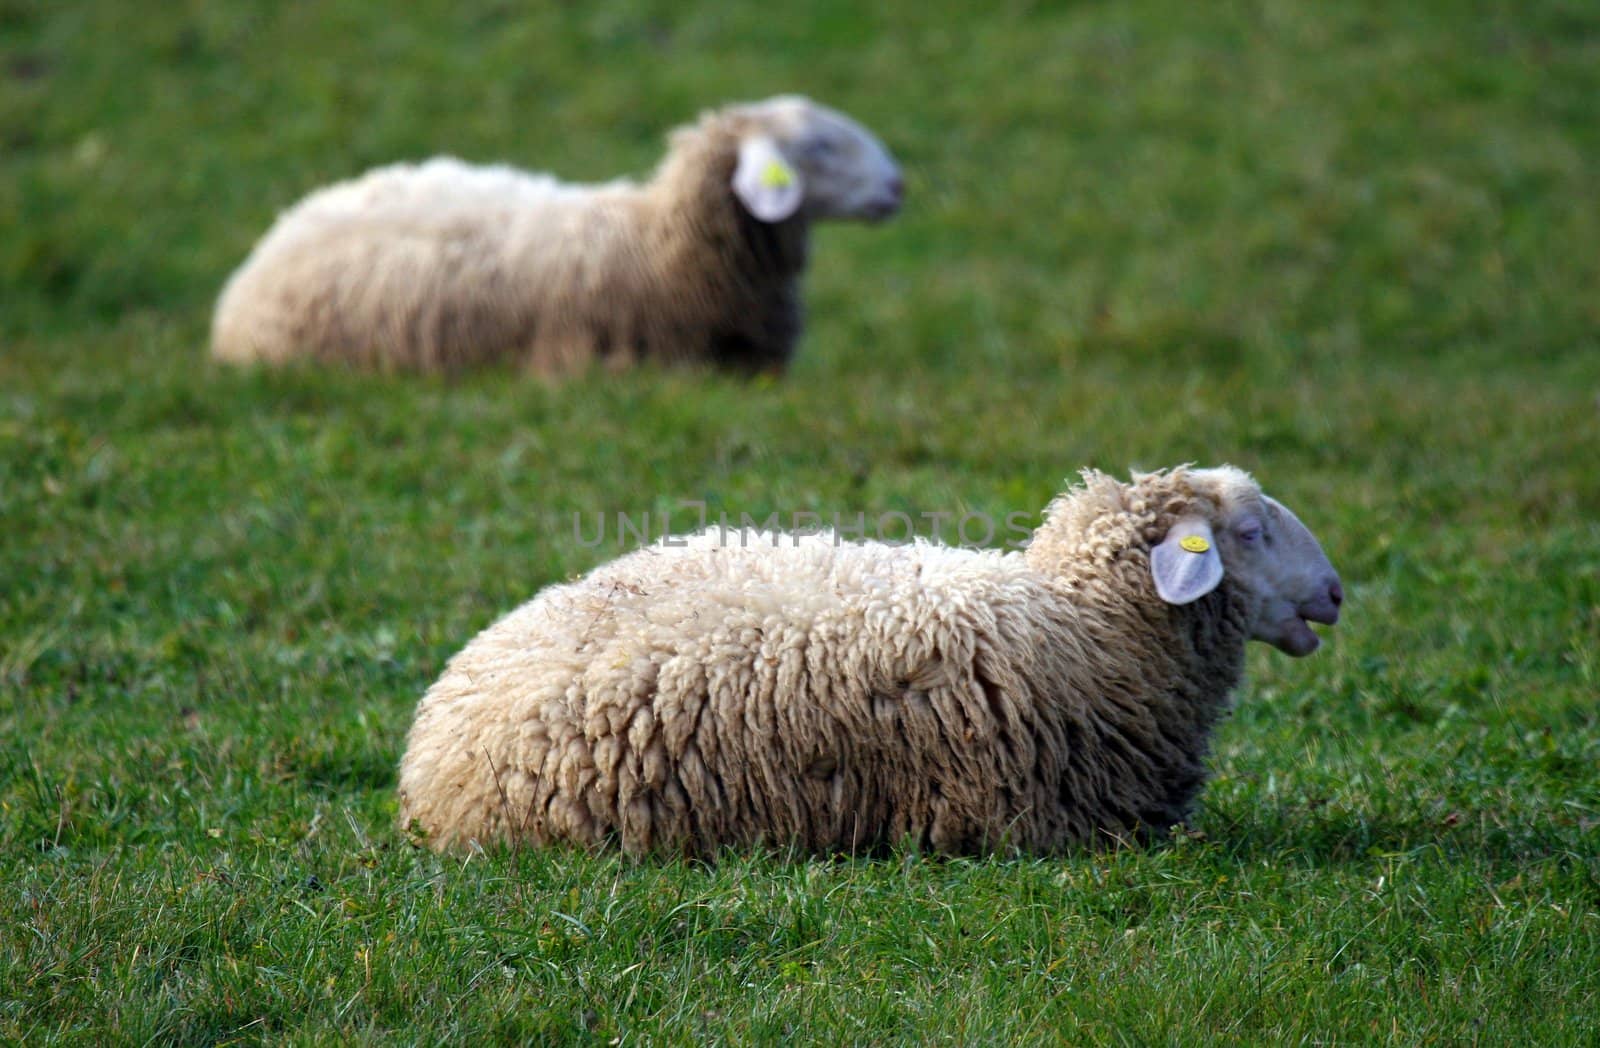 Two white sheep on a green grass. One copy of another